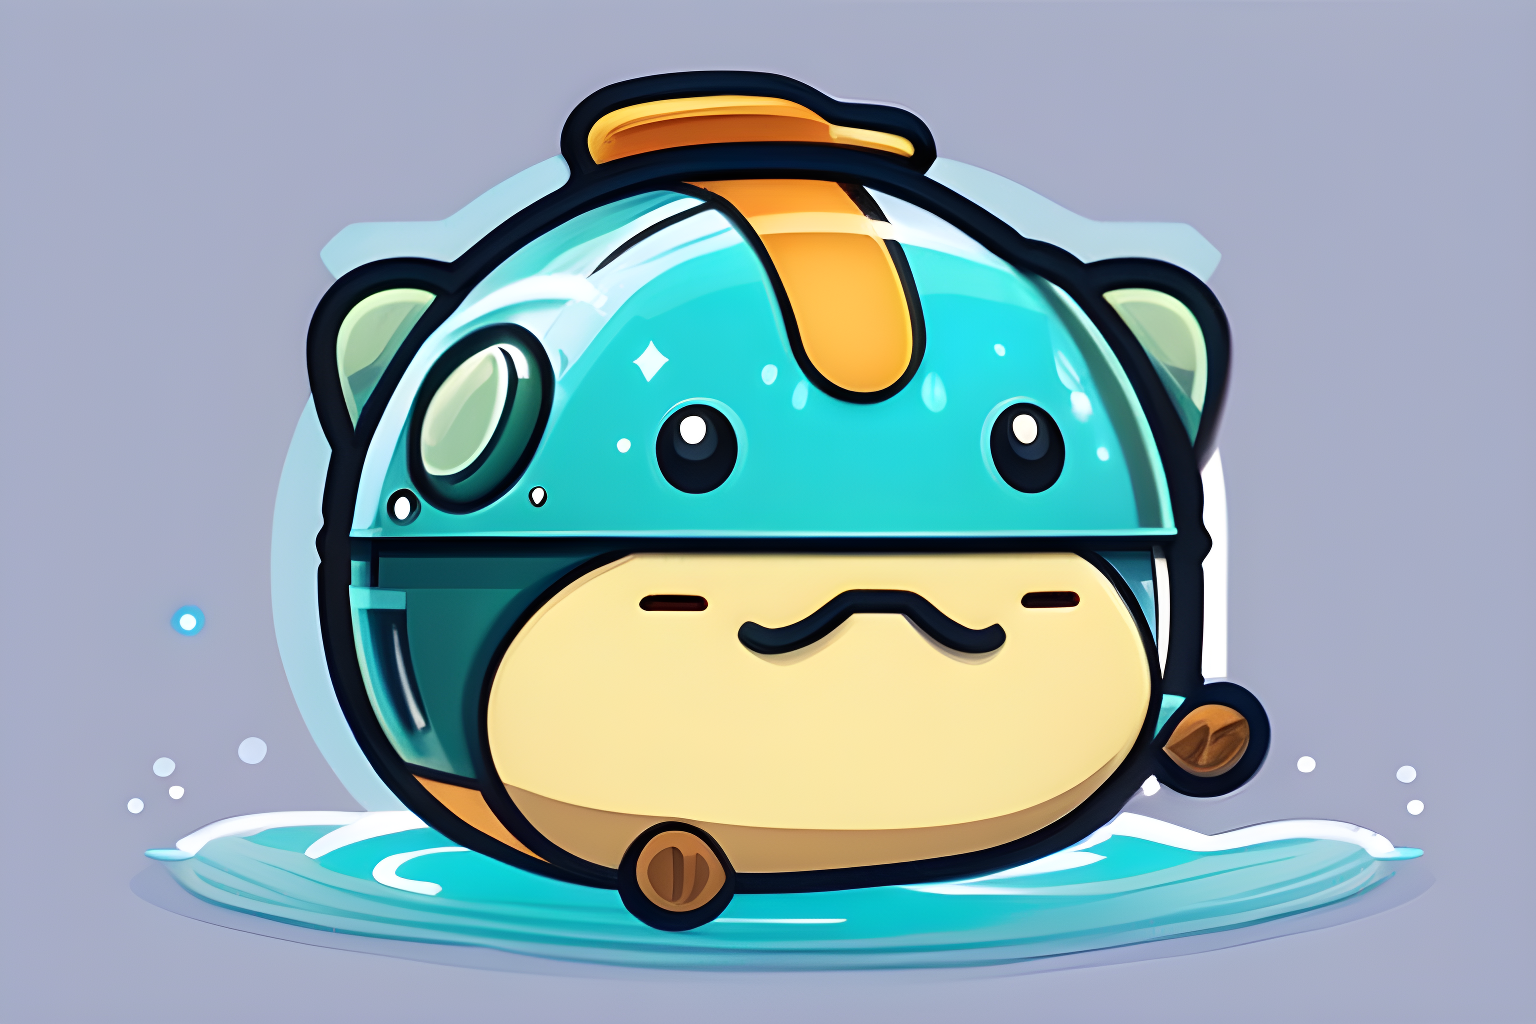 Illustrate an accurate replica of an acquatic axie from axie infinity